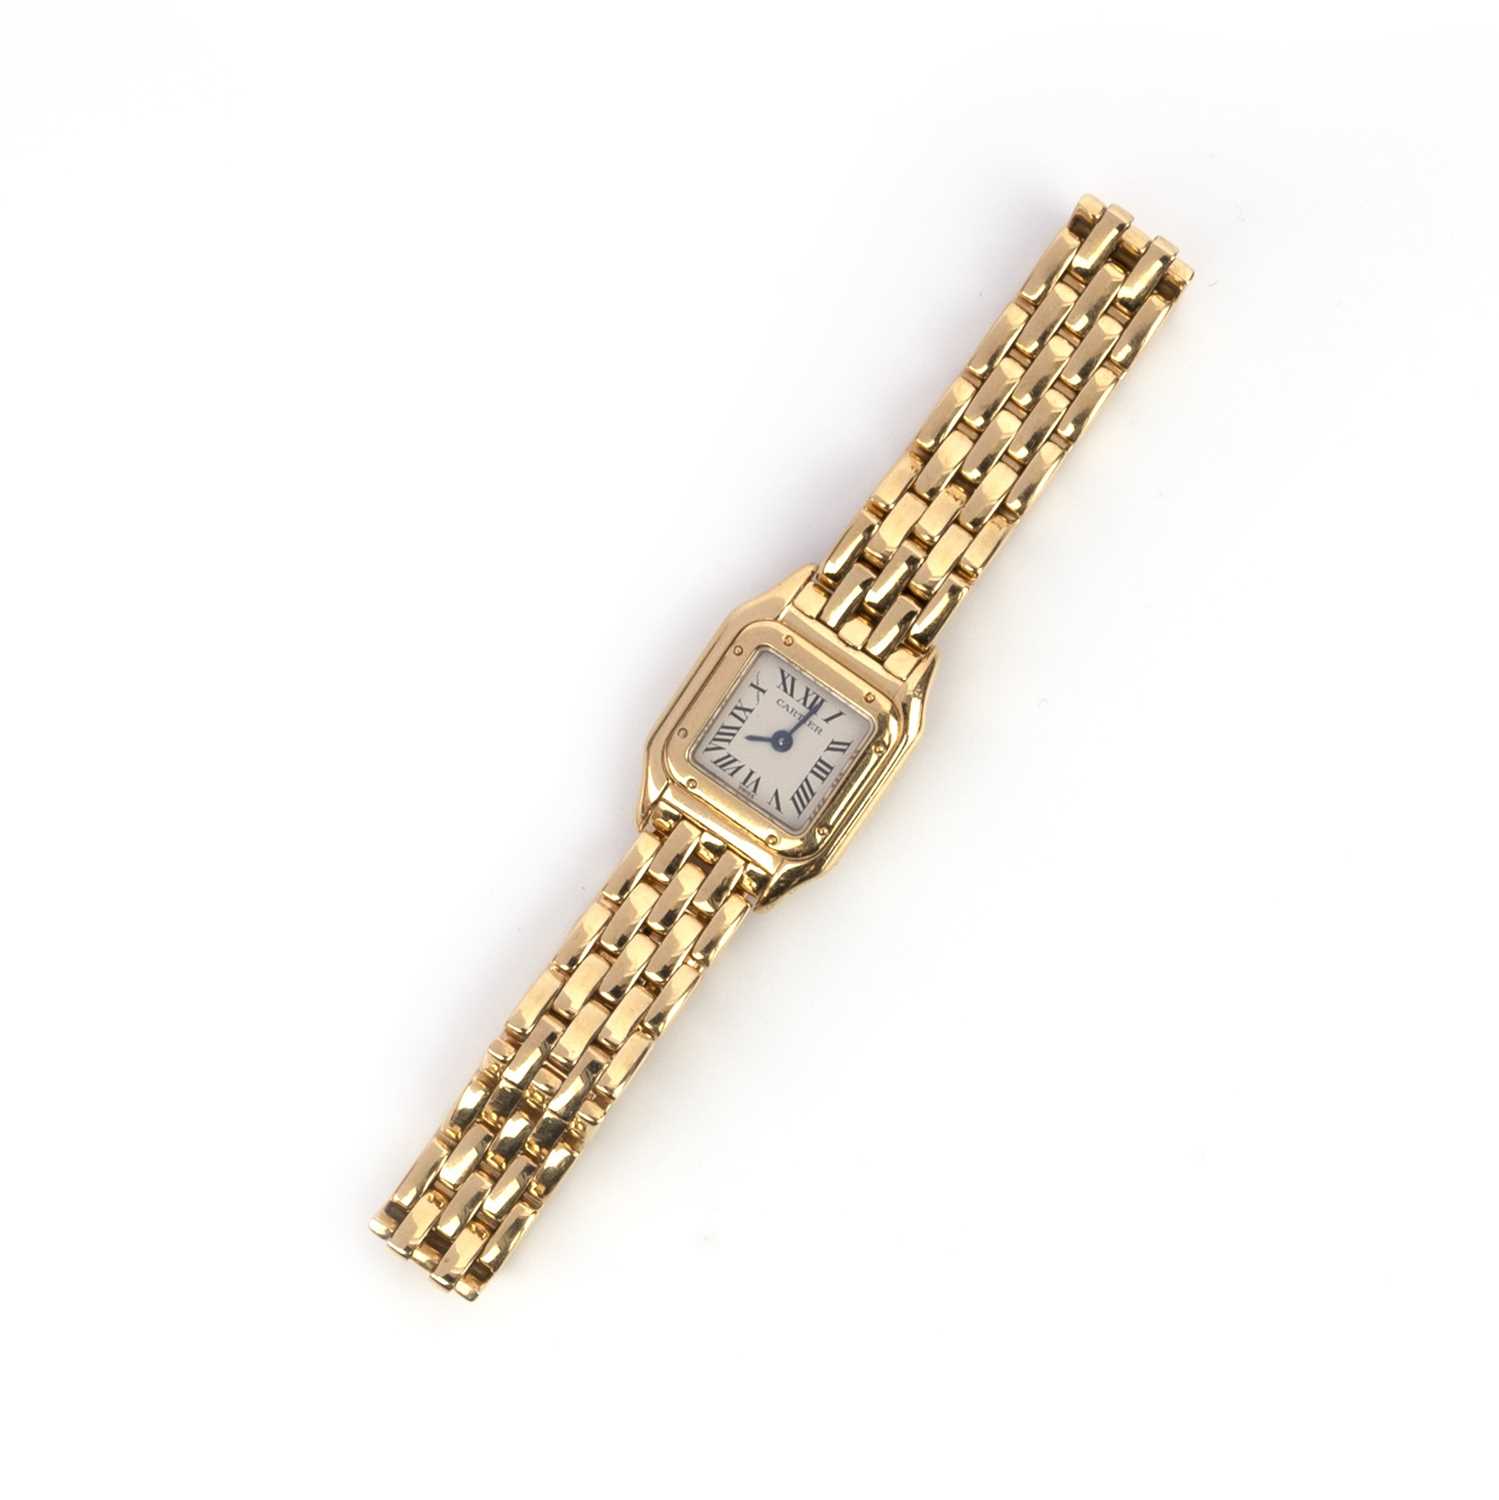 Cartier, a lady's gold wristwatch, 'Mini Panthère' ref. 1130, the square dial in cream enamel with